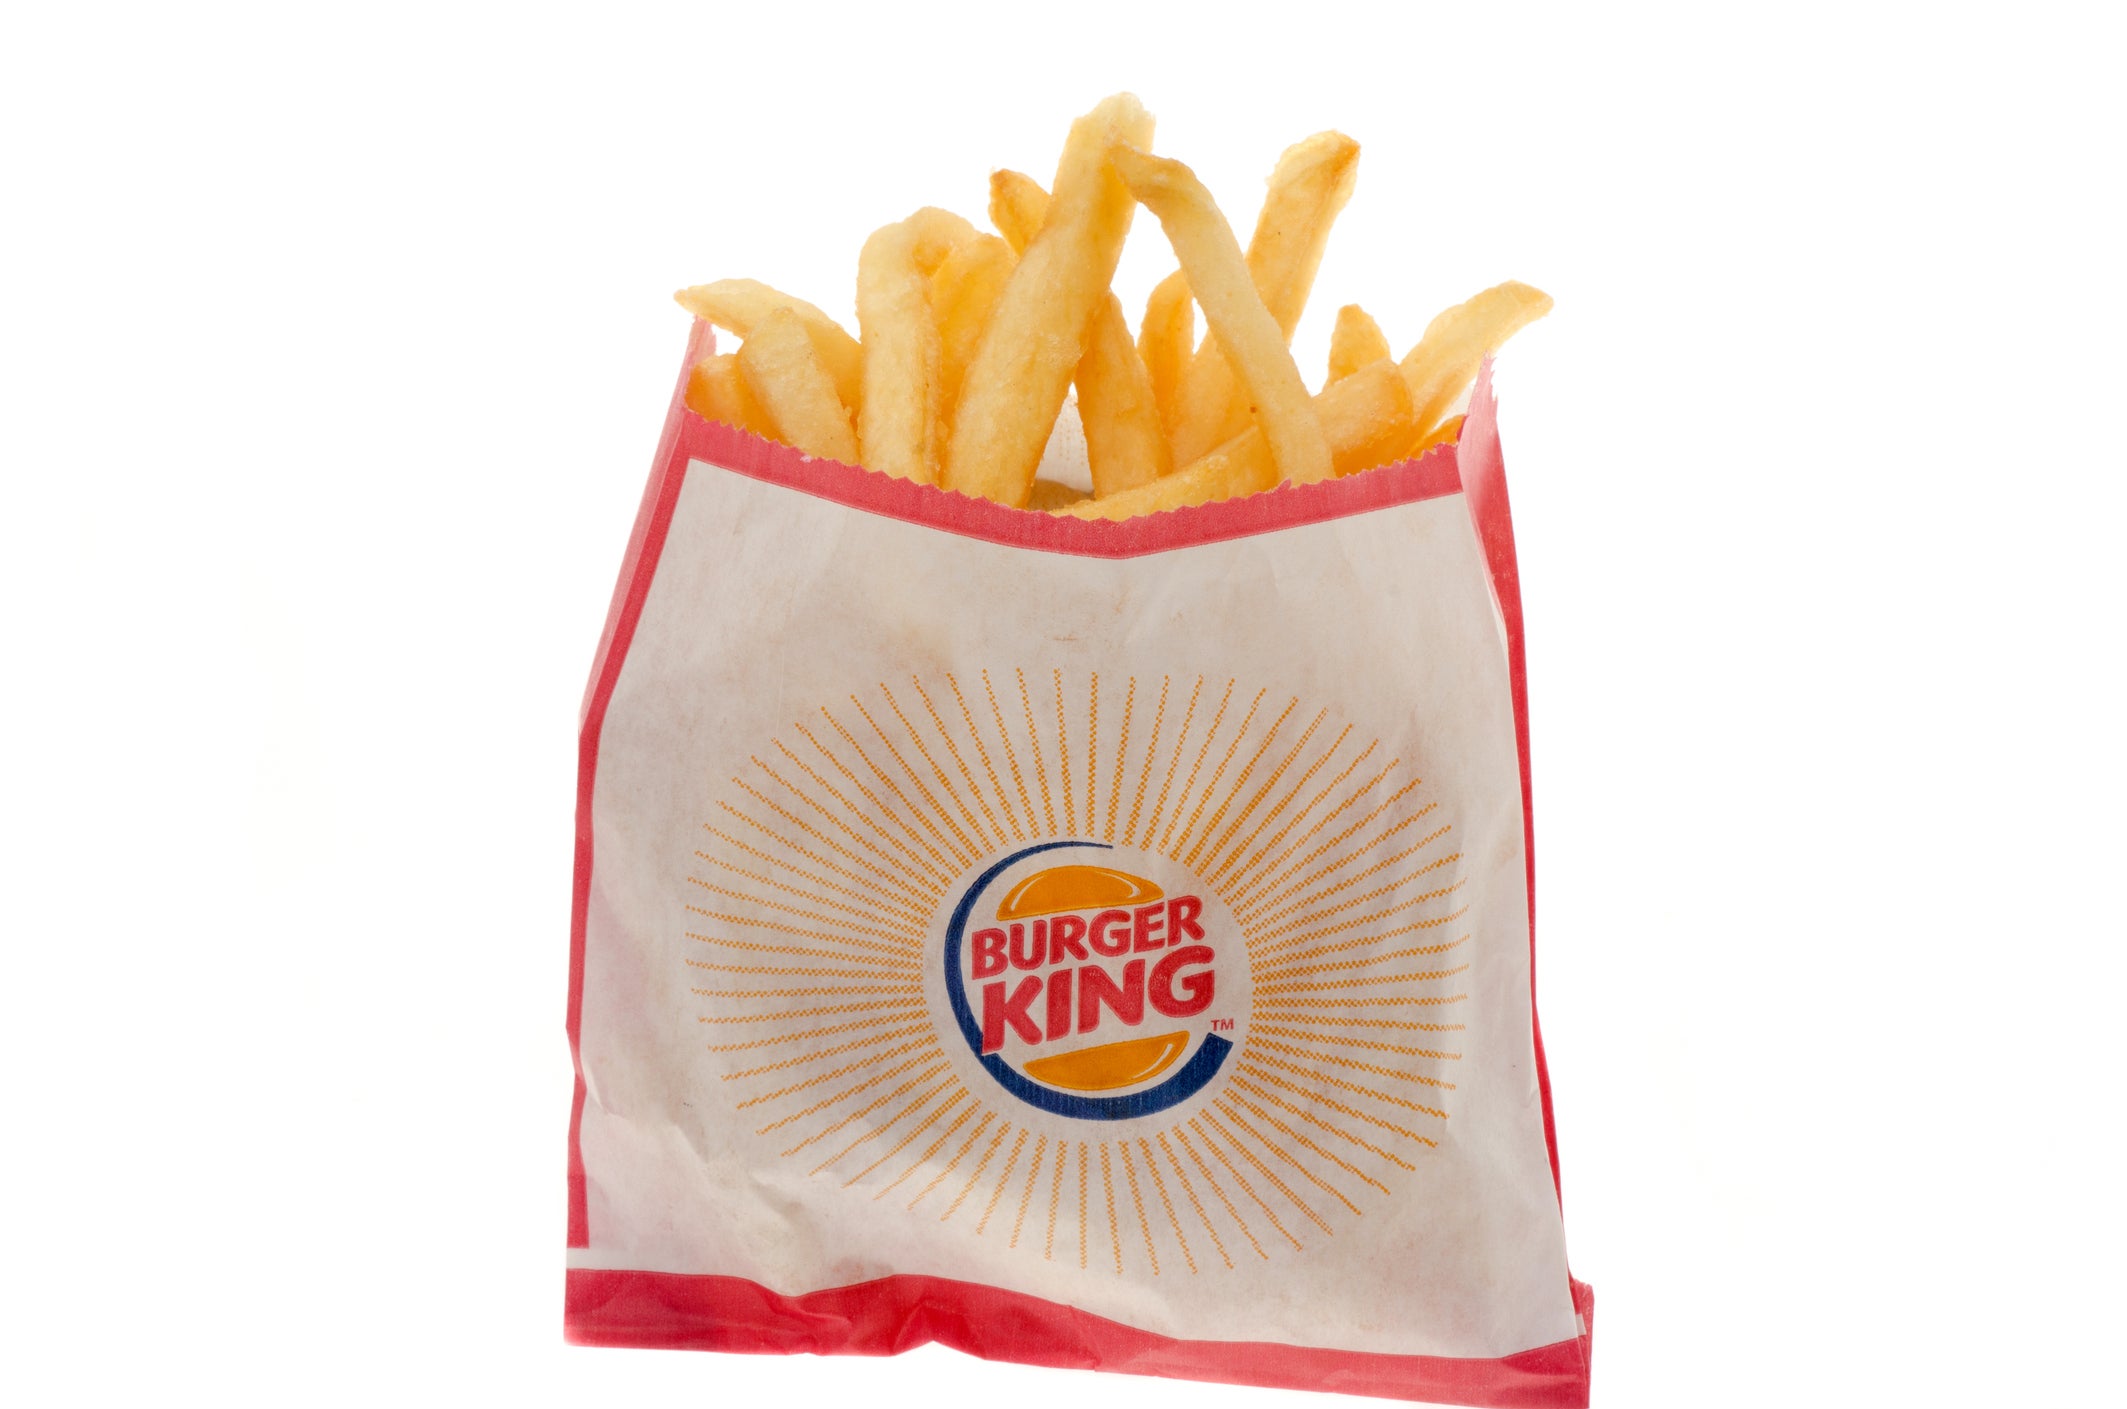 Burger King Royal Perks members will get free fries with a purchase of $1 or more every Friday for the rest of 2024